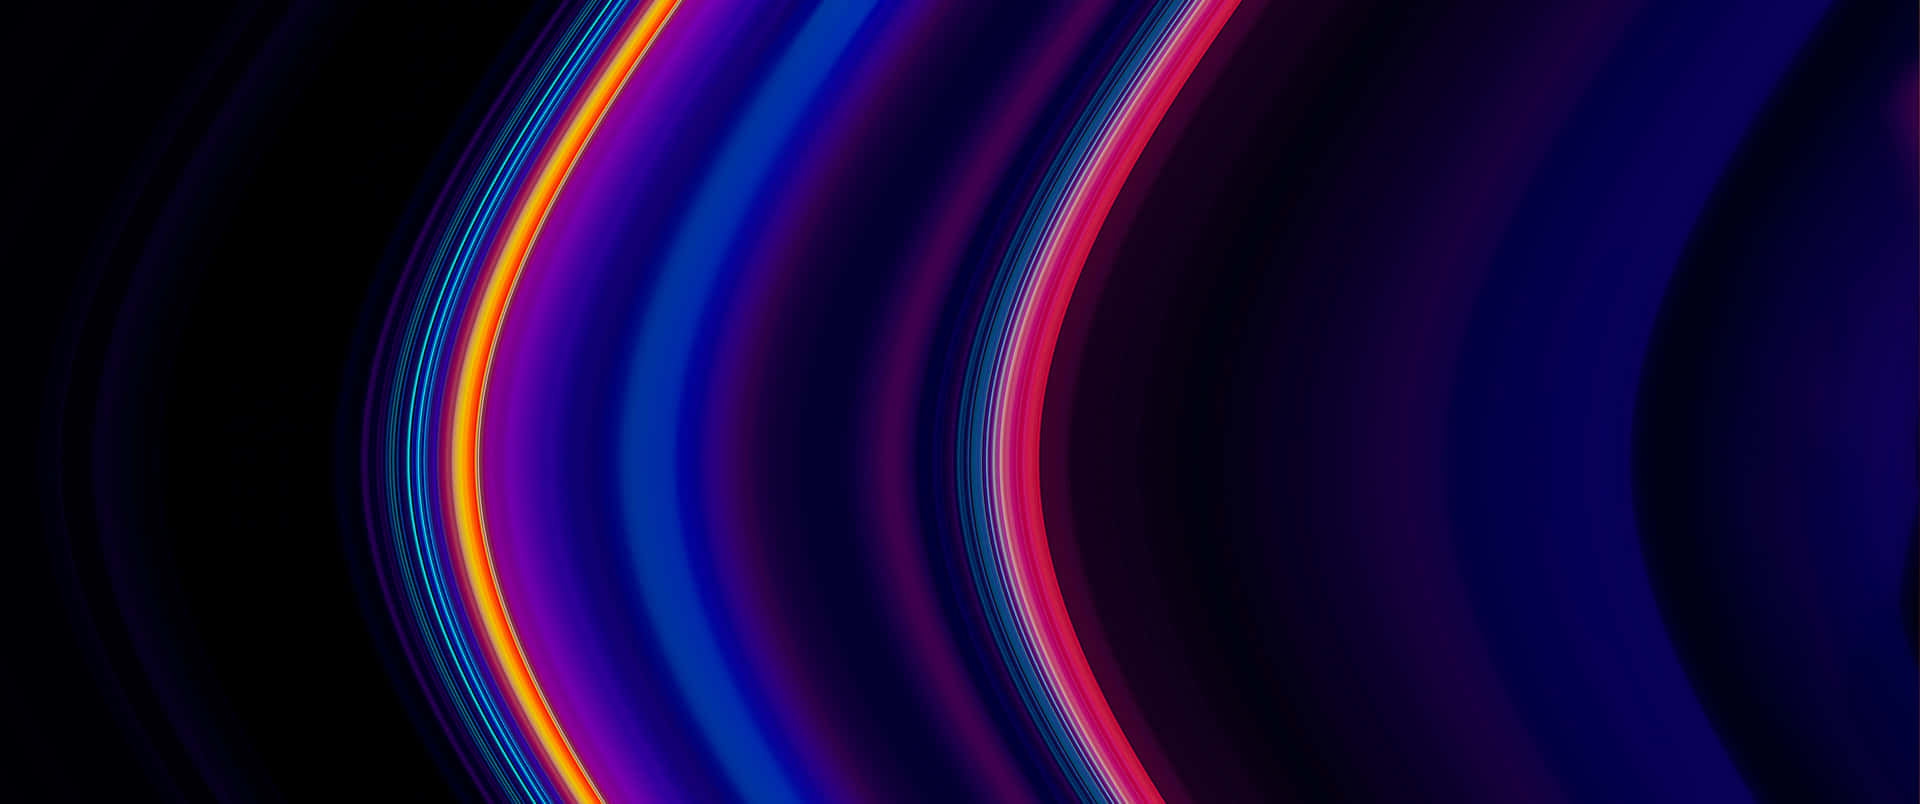 Bright neon theme sprays out of the darkness Wallpaper